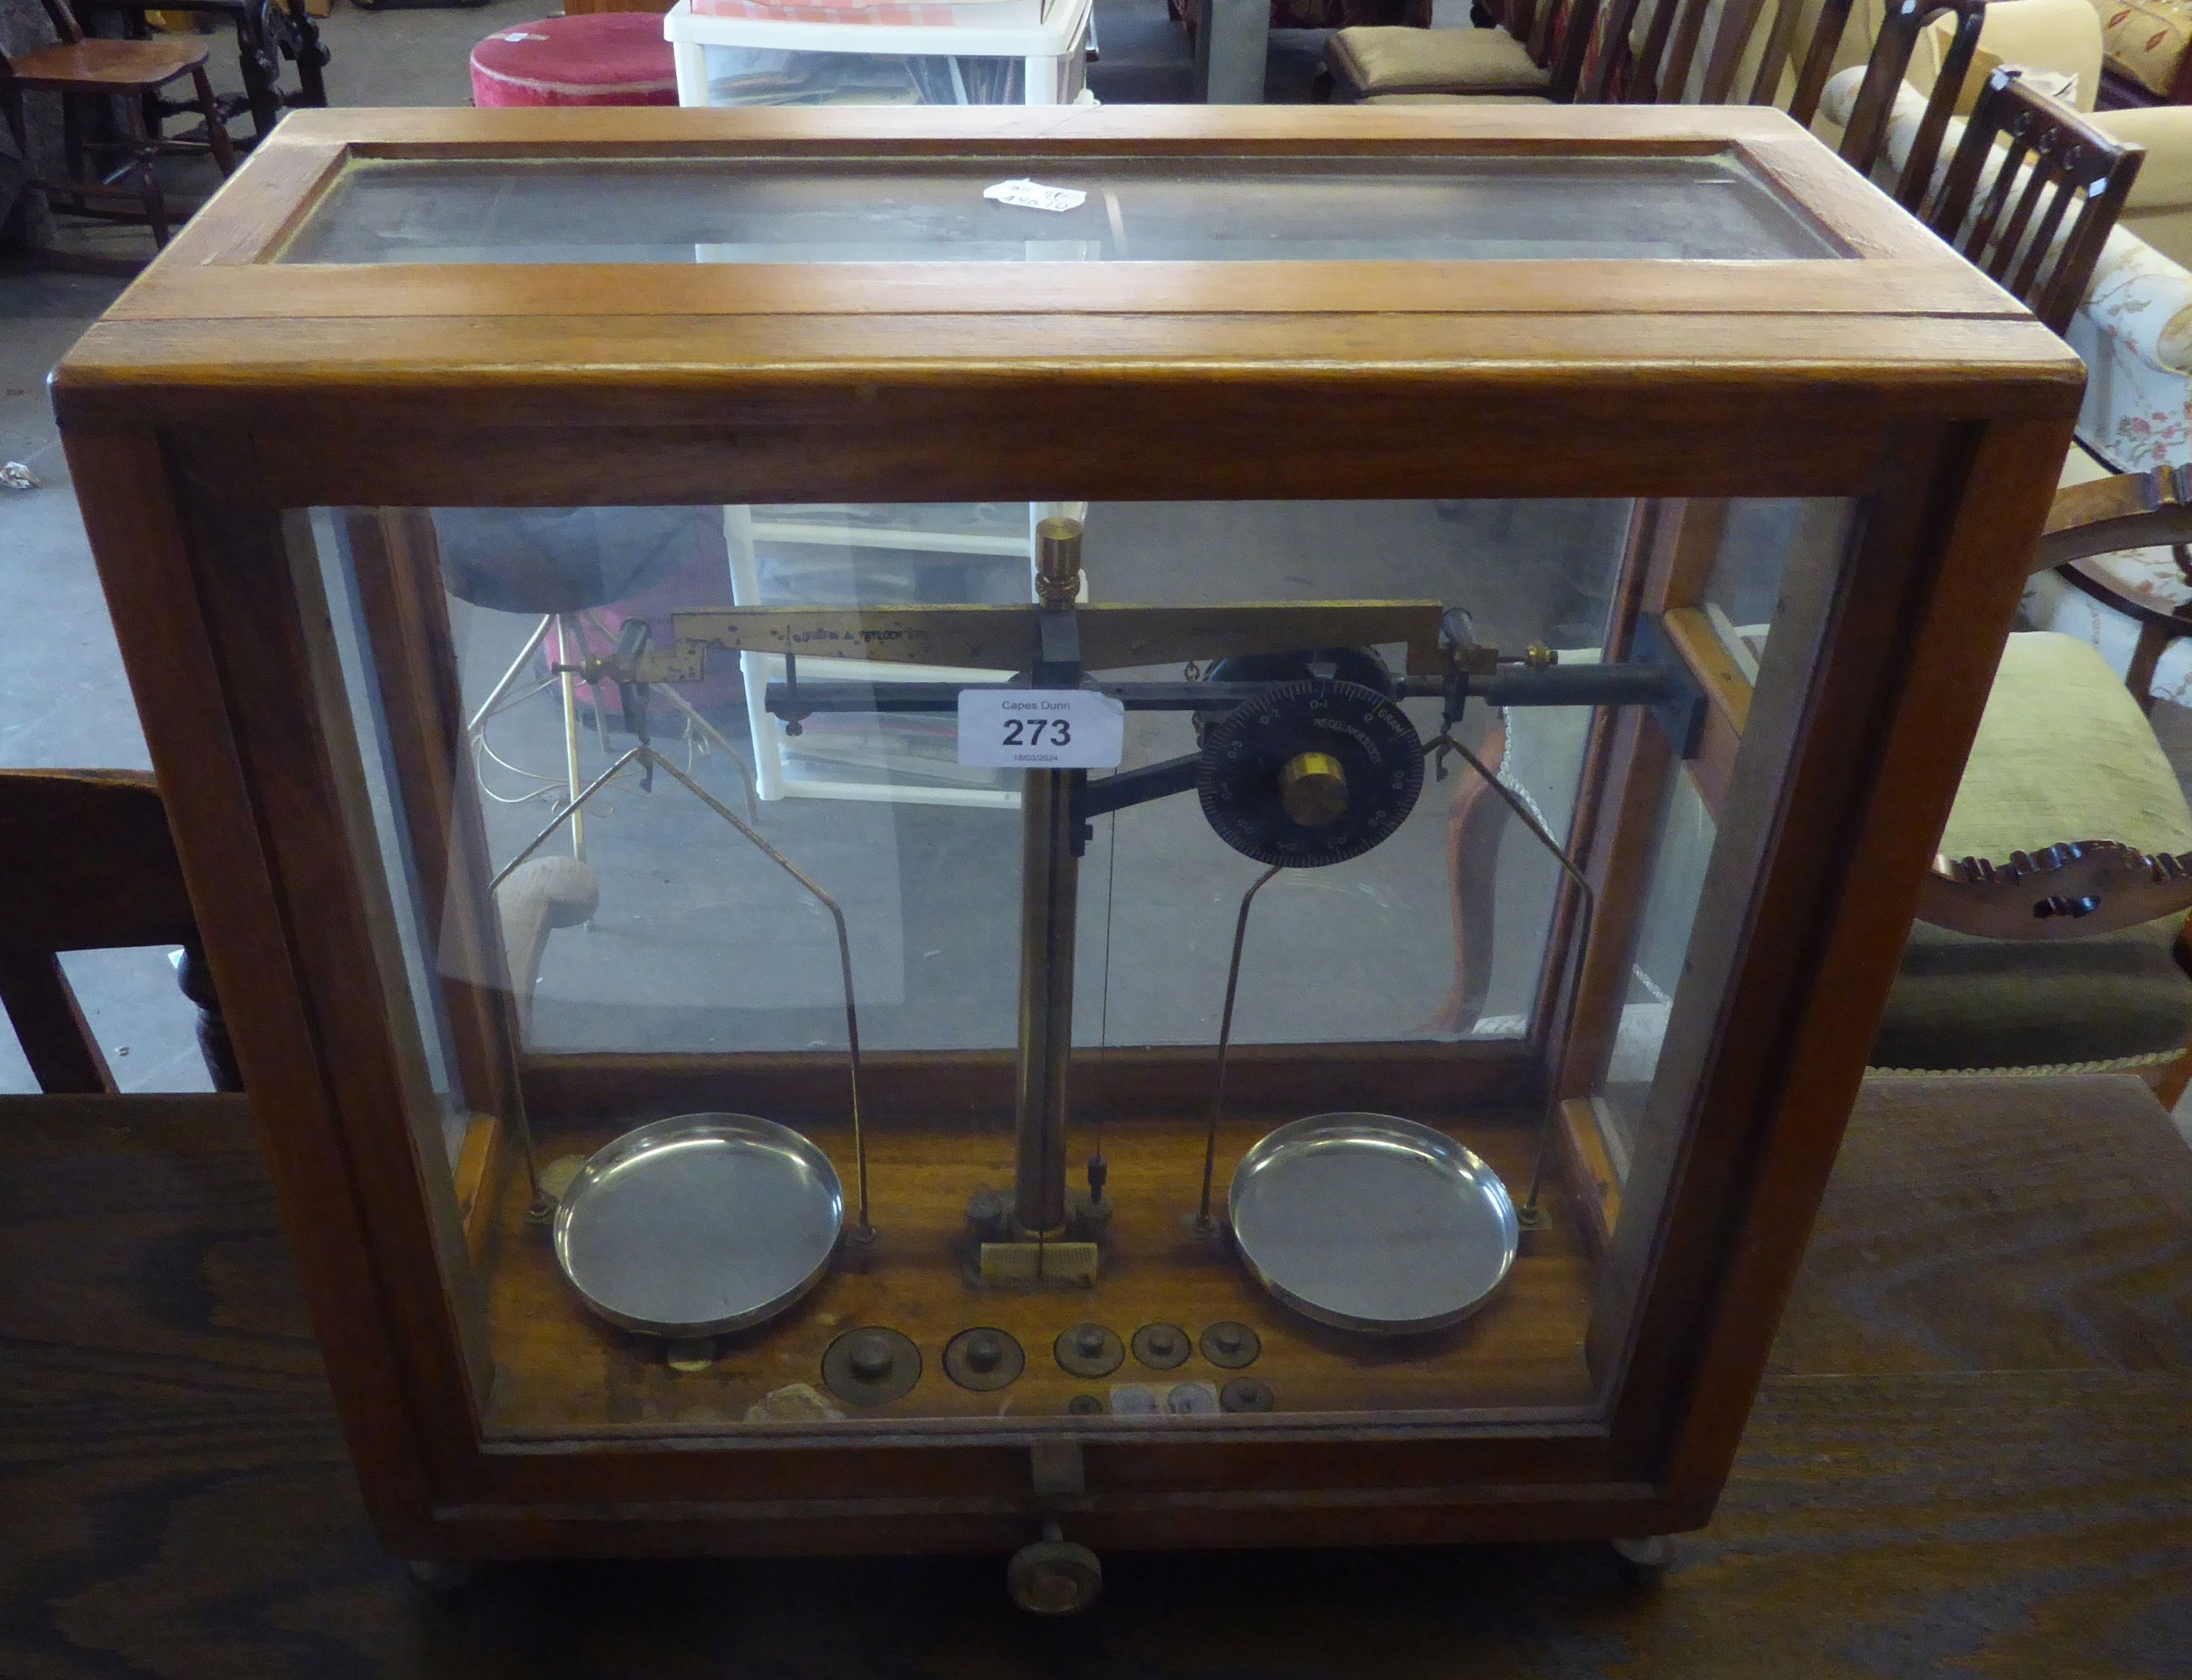 SET OF CHEMIST BALANCE SCALES, IN OAK AND GLAZED CASE, WITH A SET OF BRASS WEIGHTS